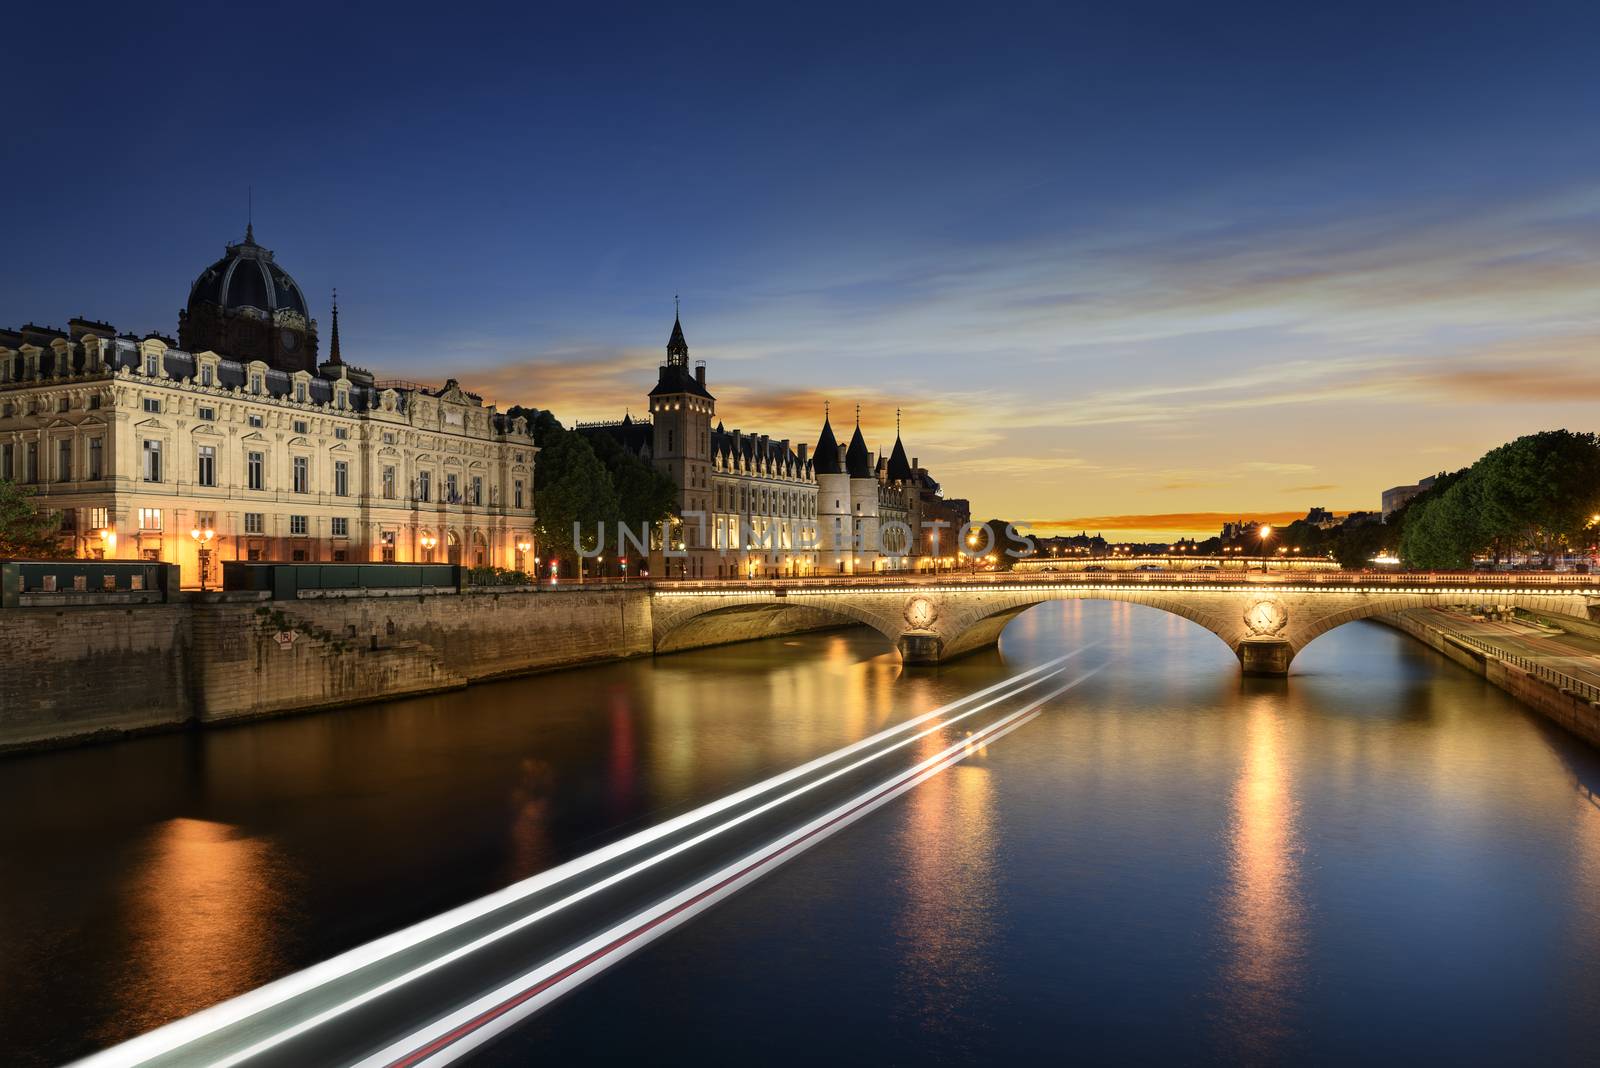 Boat tour on Seine river in Paris with sunset. Paris, France by ventdusud